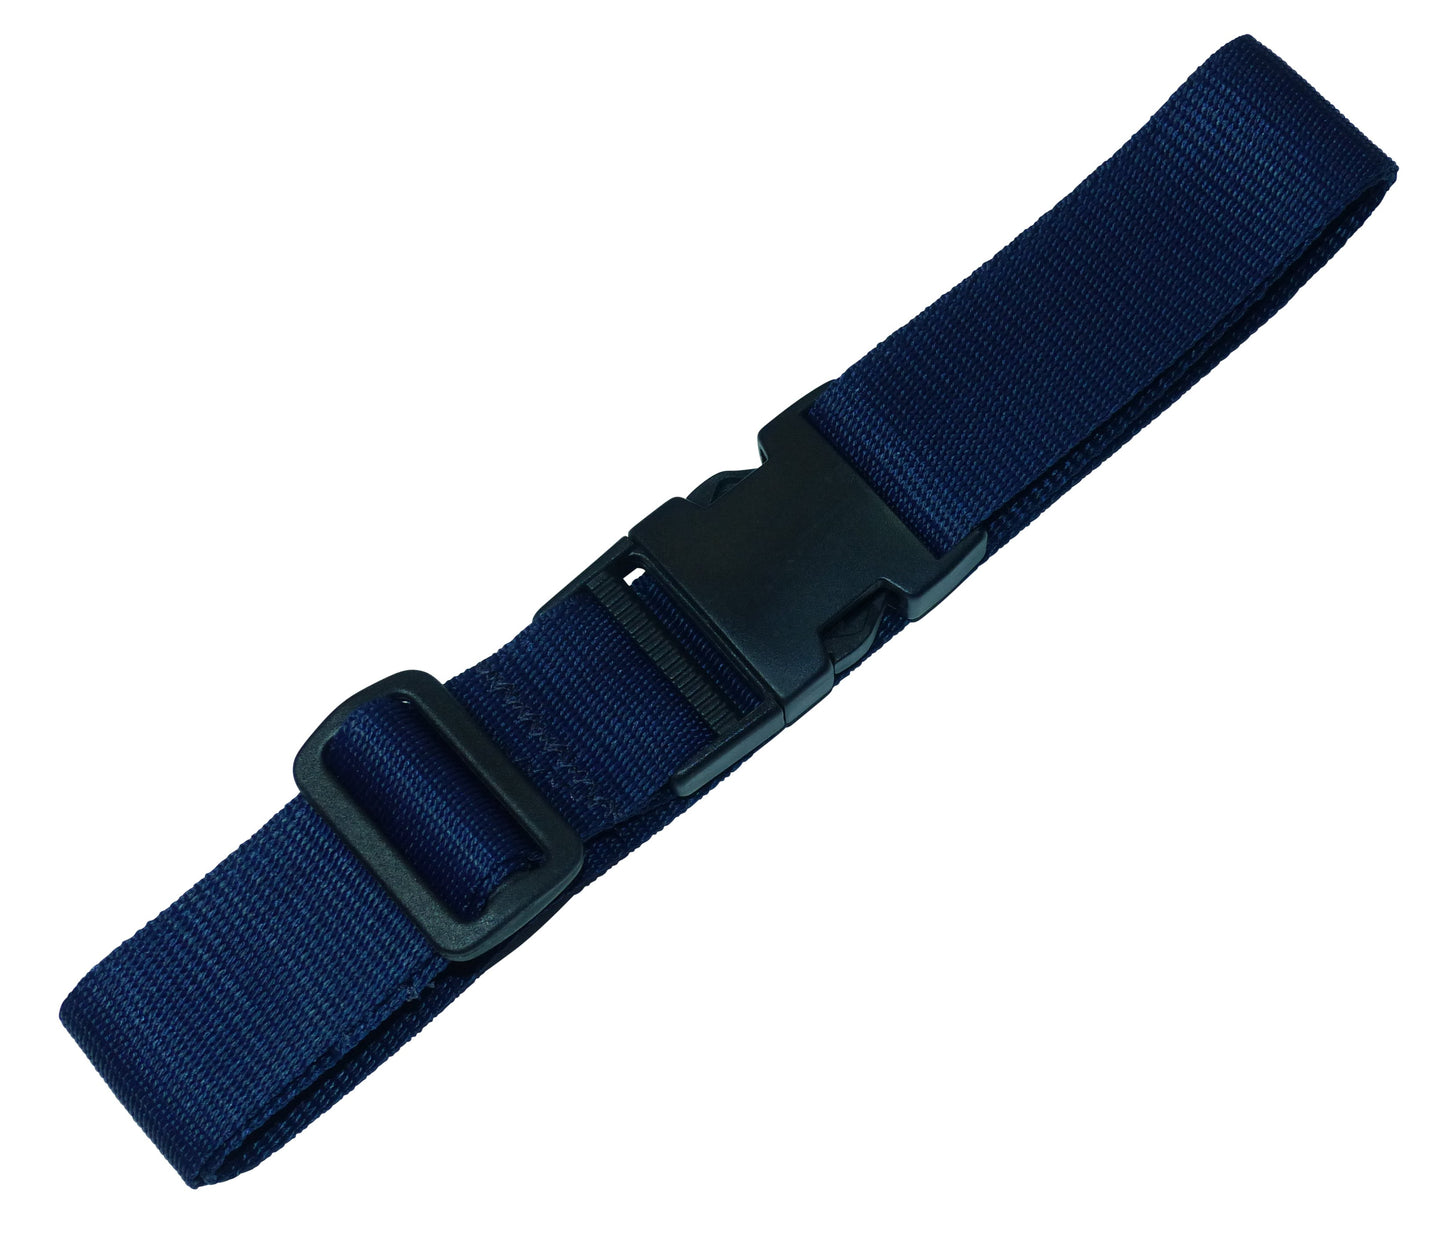 Benristraps 38mm Webbing Strap with Quick Release & Length-Adjusting Buckles in navy blue